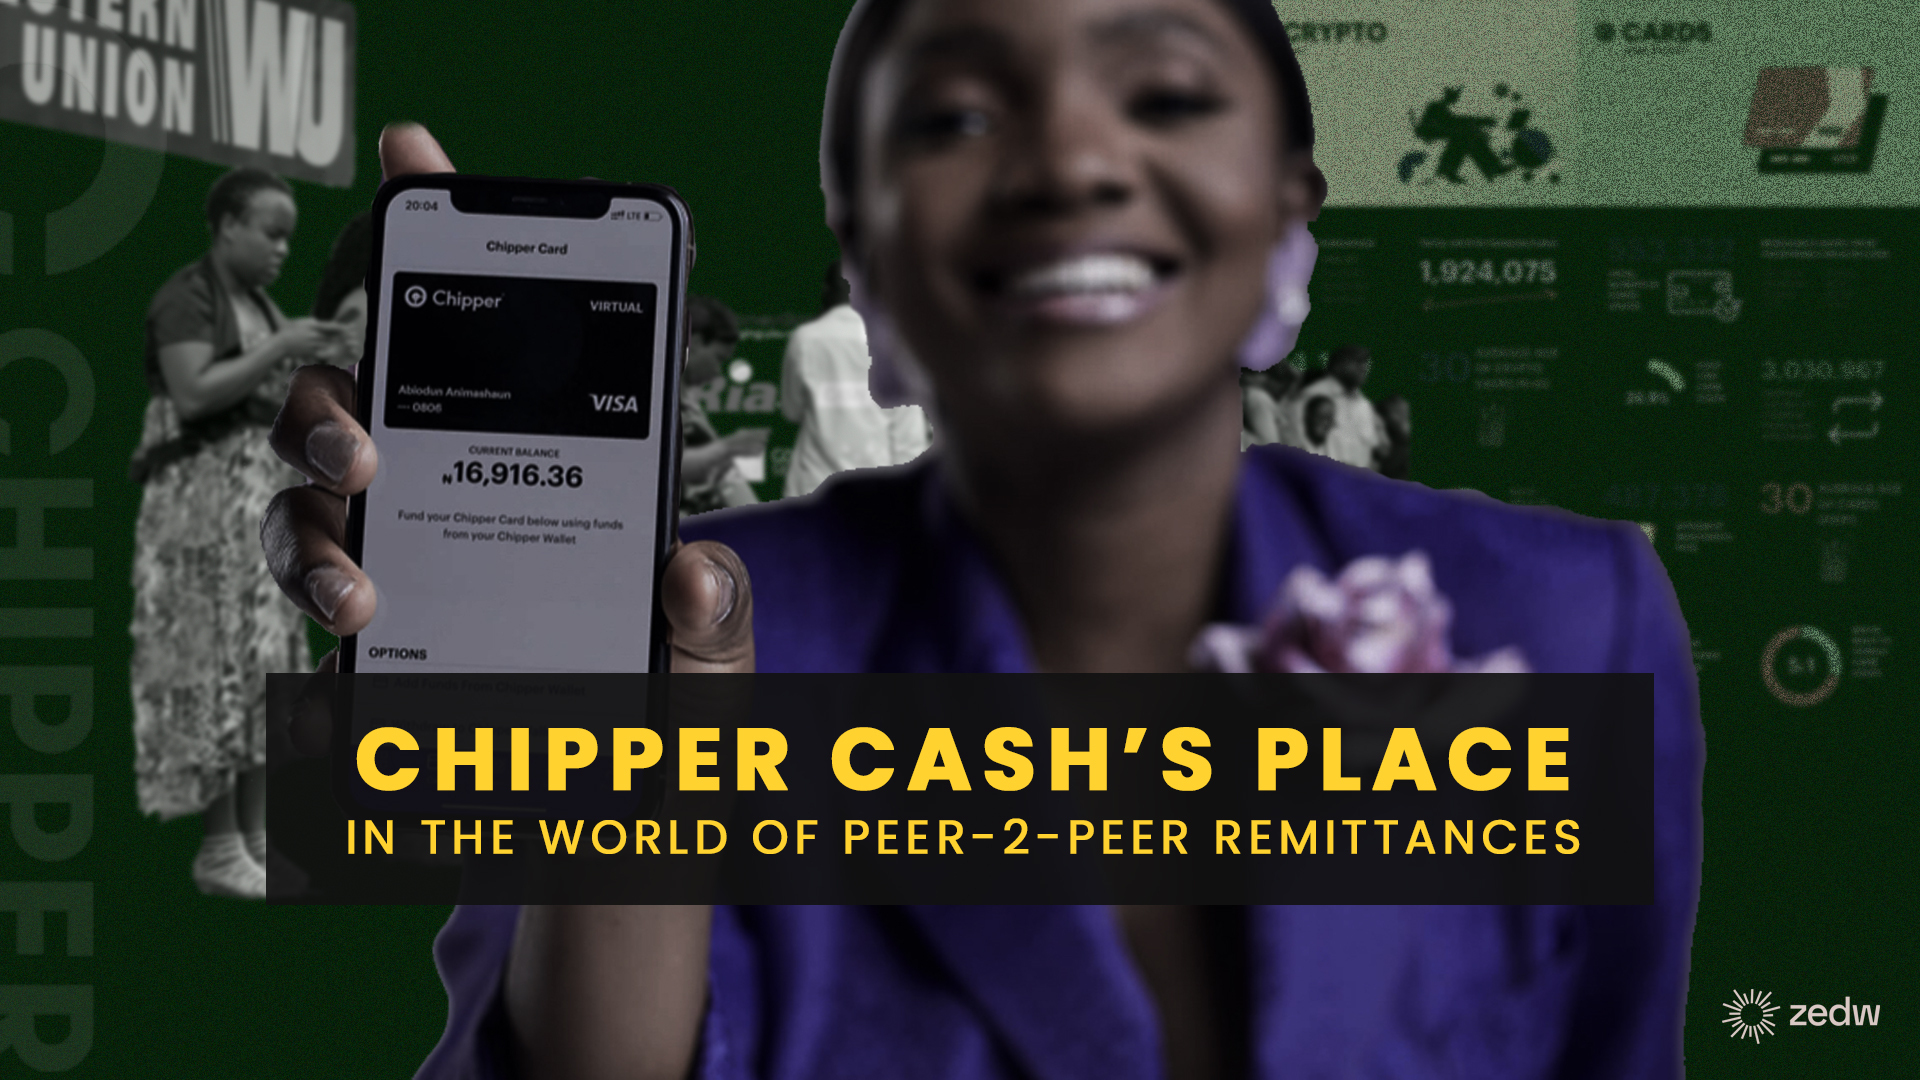 Chipper Cash and the SADC remittance opportunity